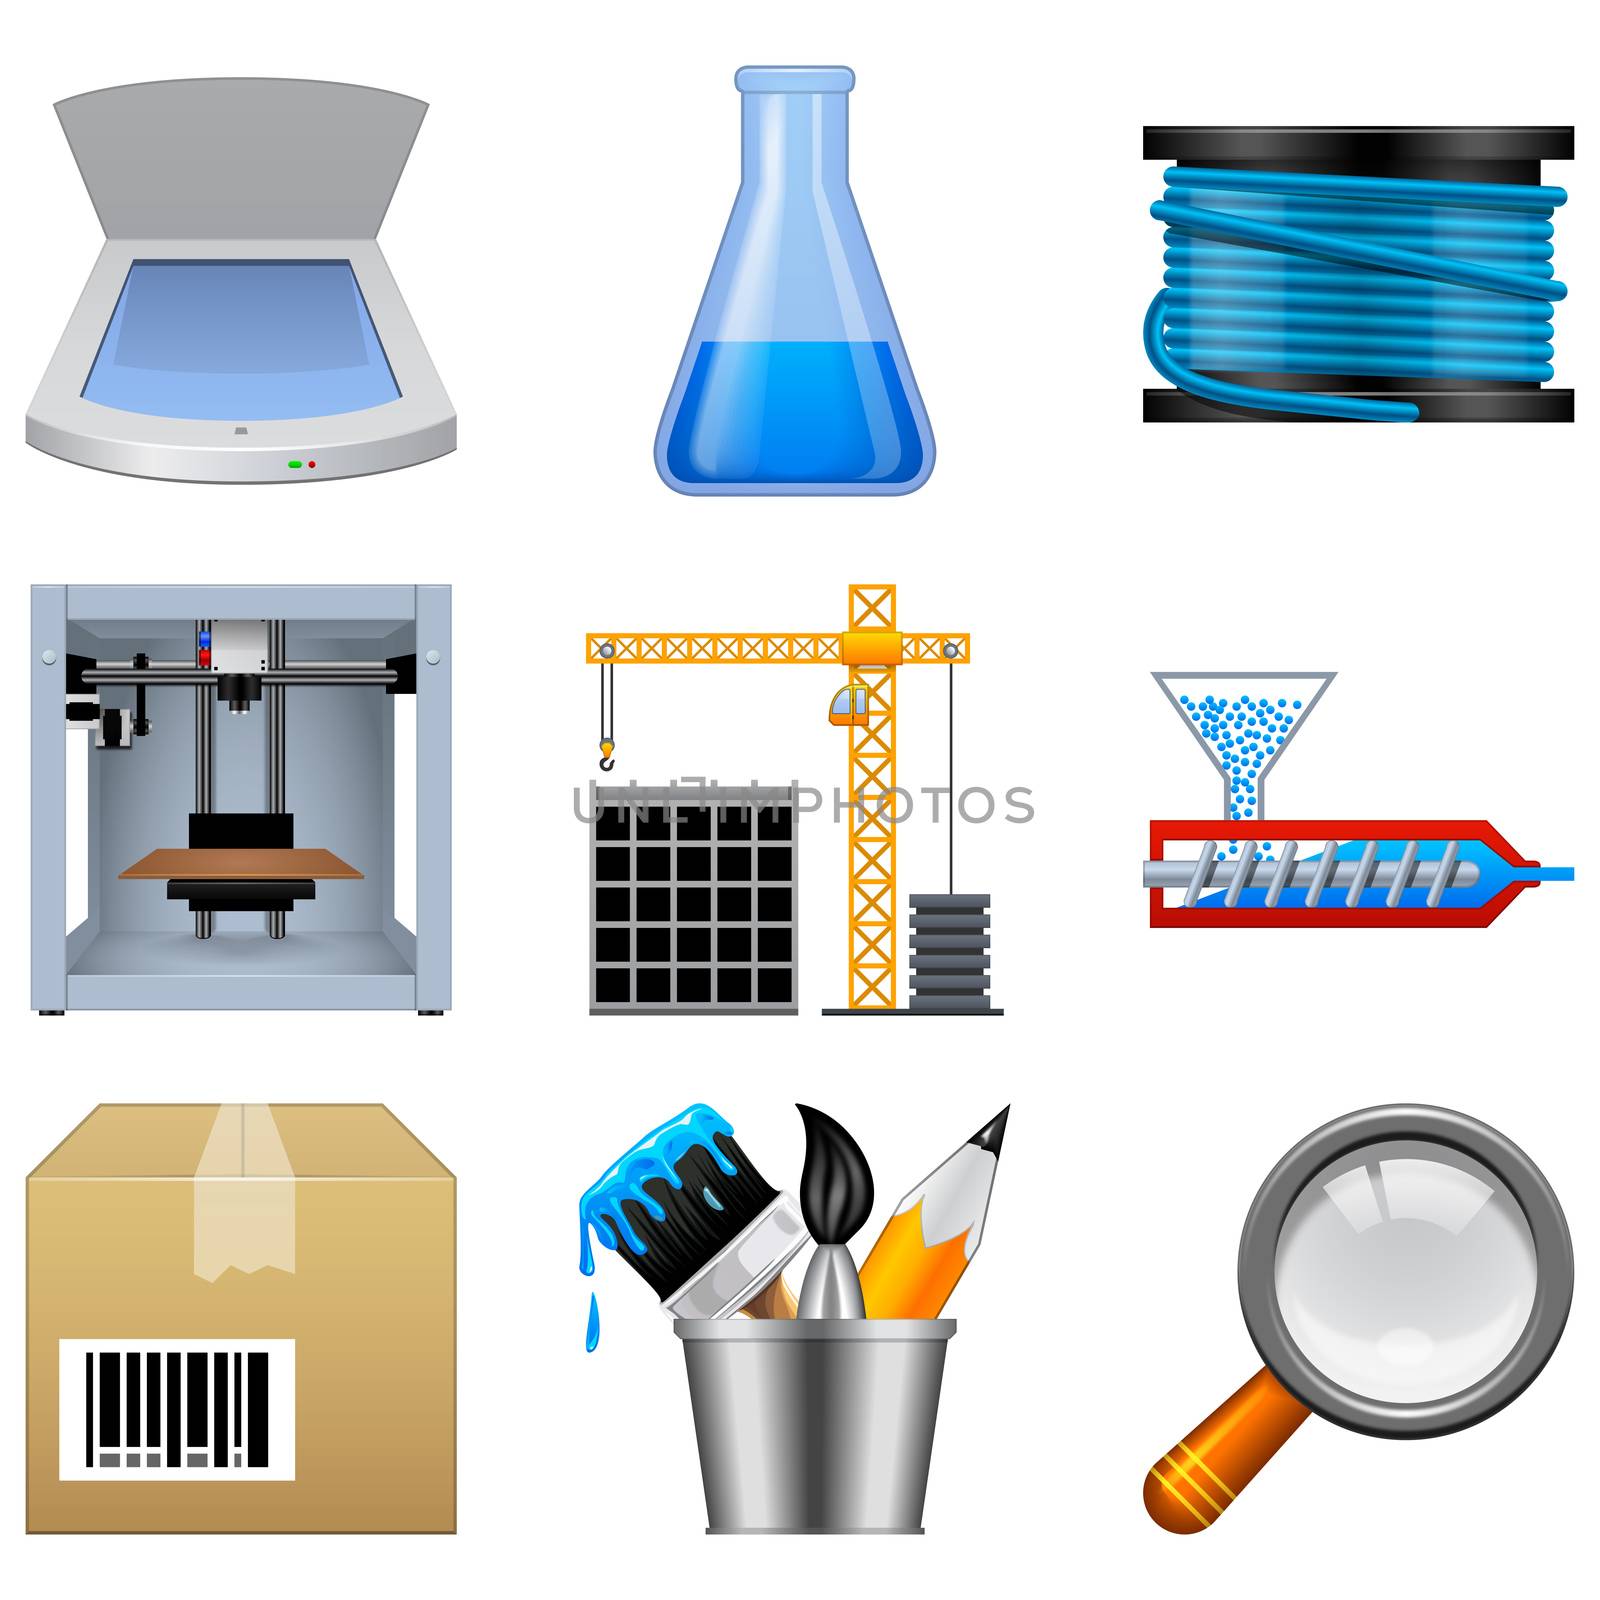 Additive manufacturing icons isolated on a white background. This icon set is useful for 3d printer applications.